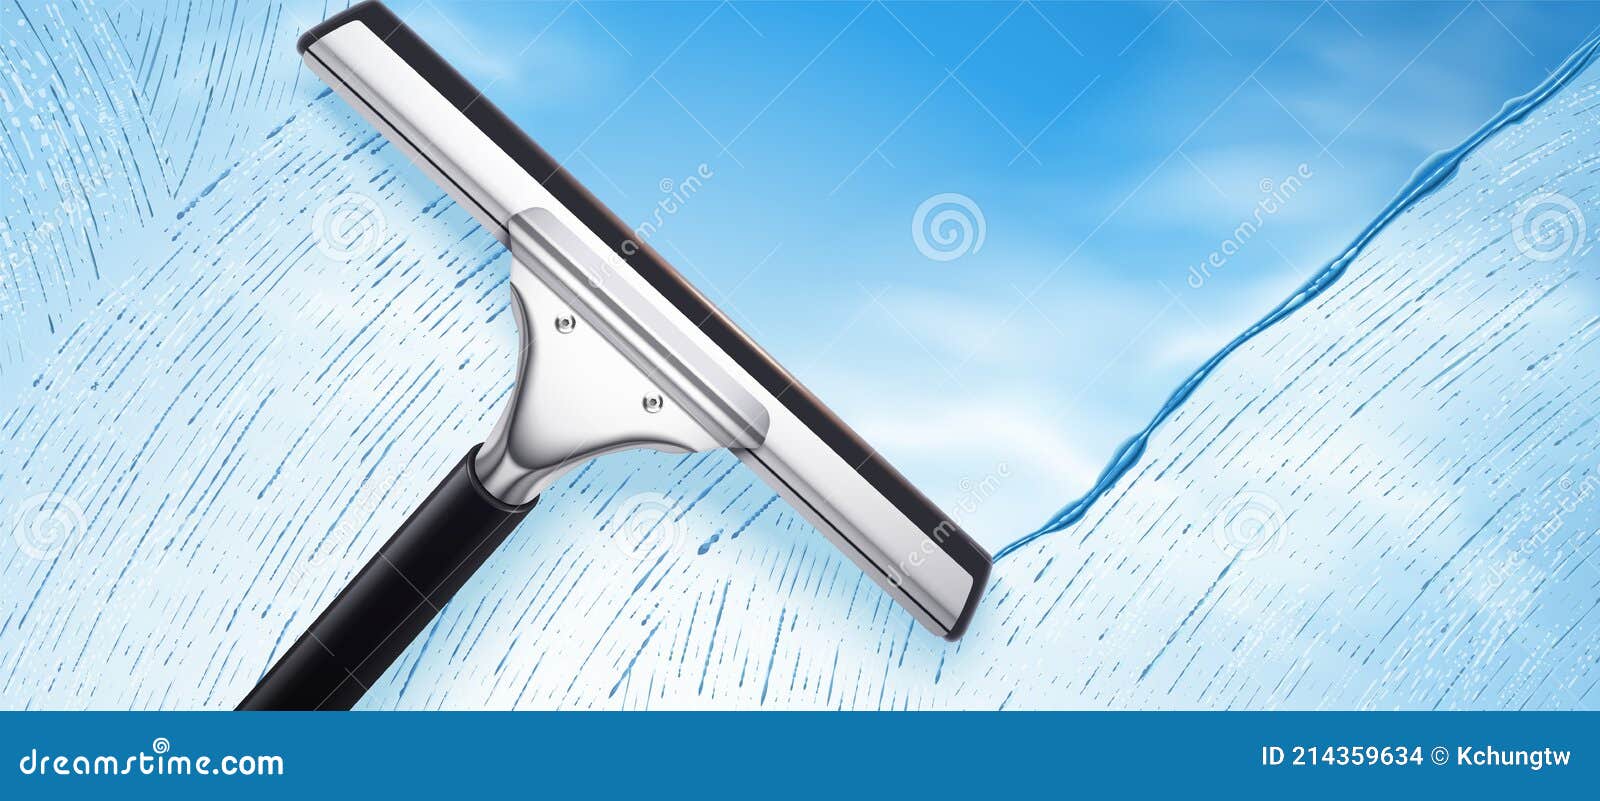 squeegee cleaning glass